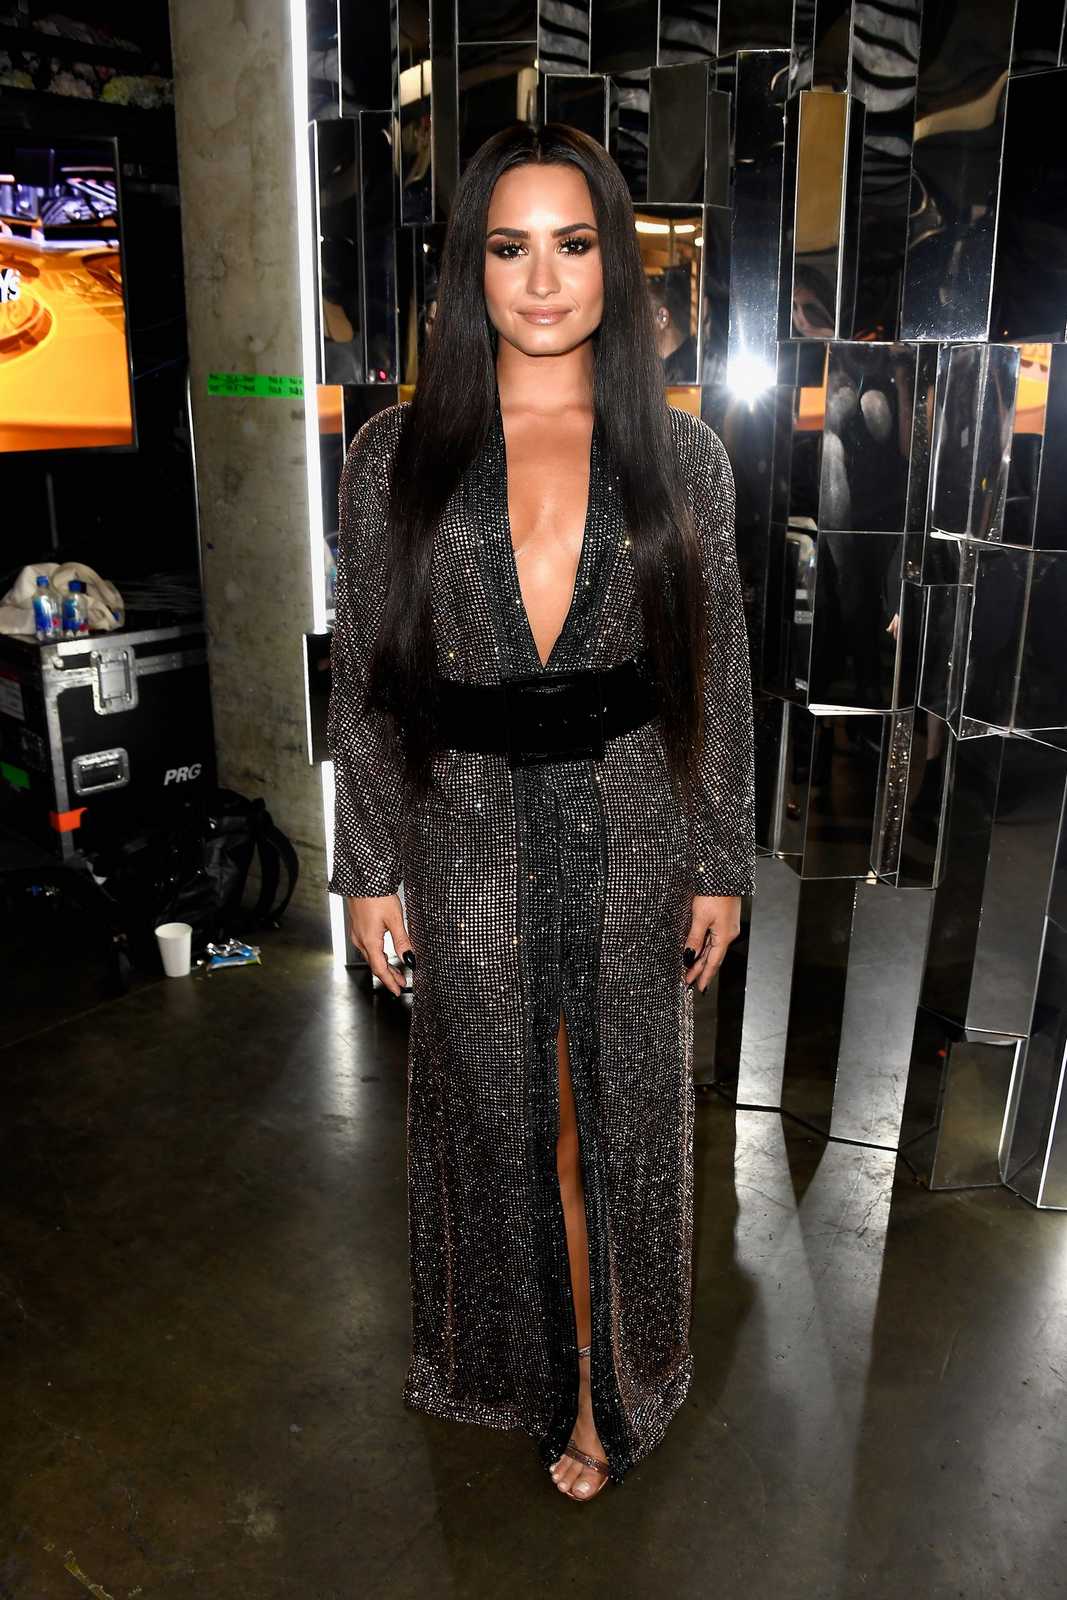 Demi_Lovato_-_The_59th_GRAMMY_Awards_at_STAPLES_Center_in_Los_Angeles_5BBackstage5D-06.jpg